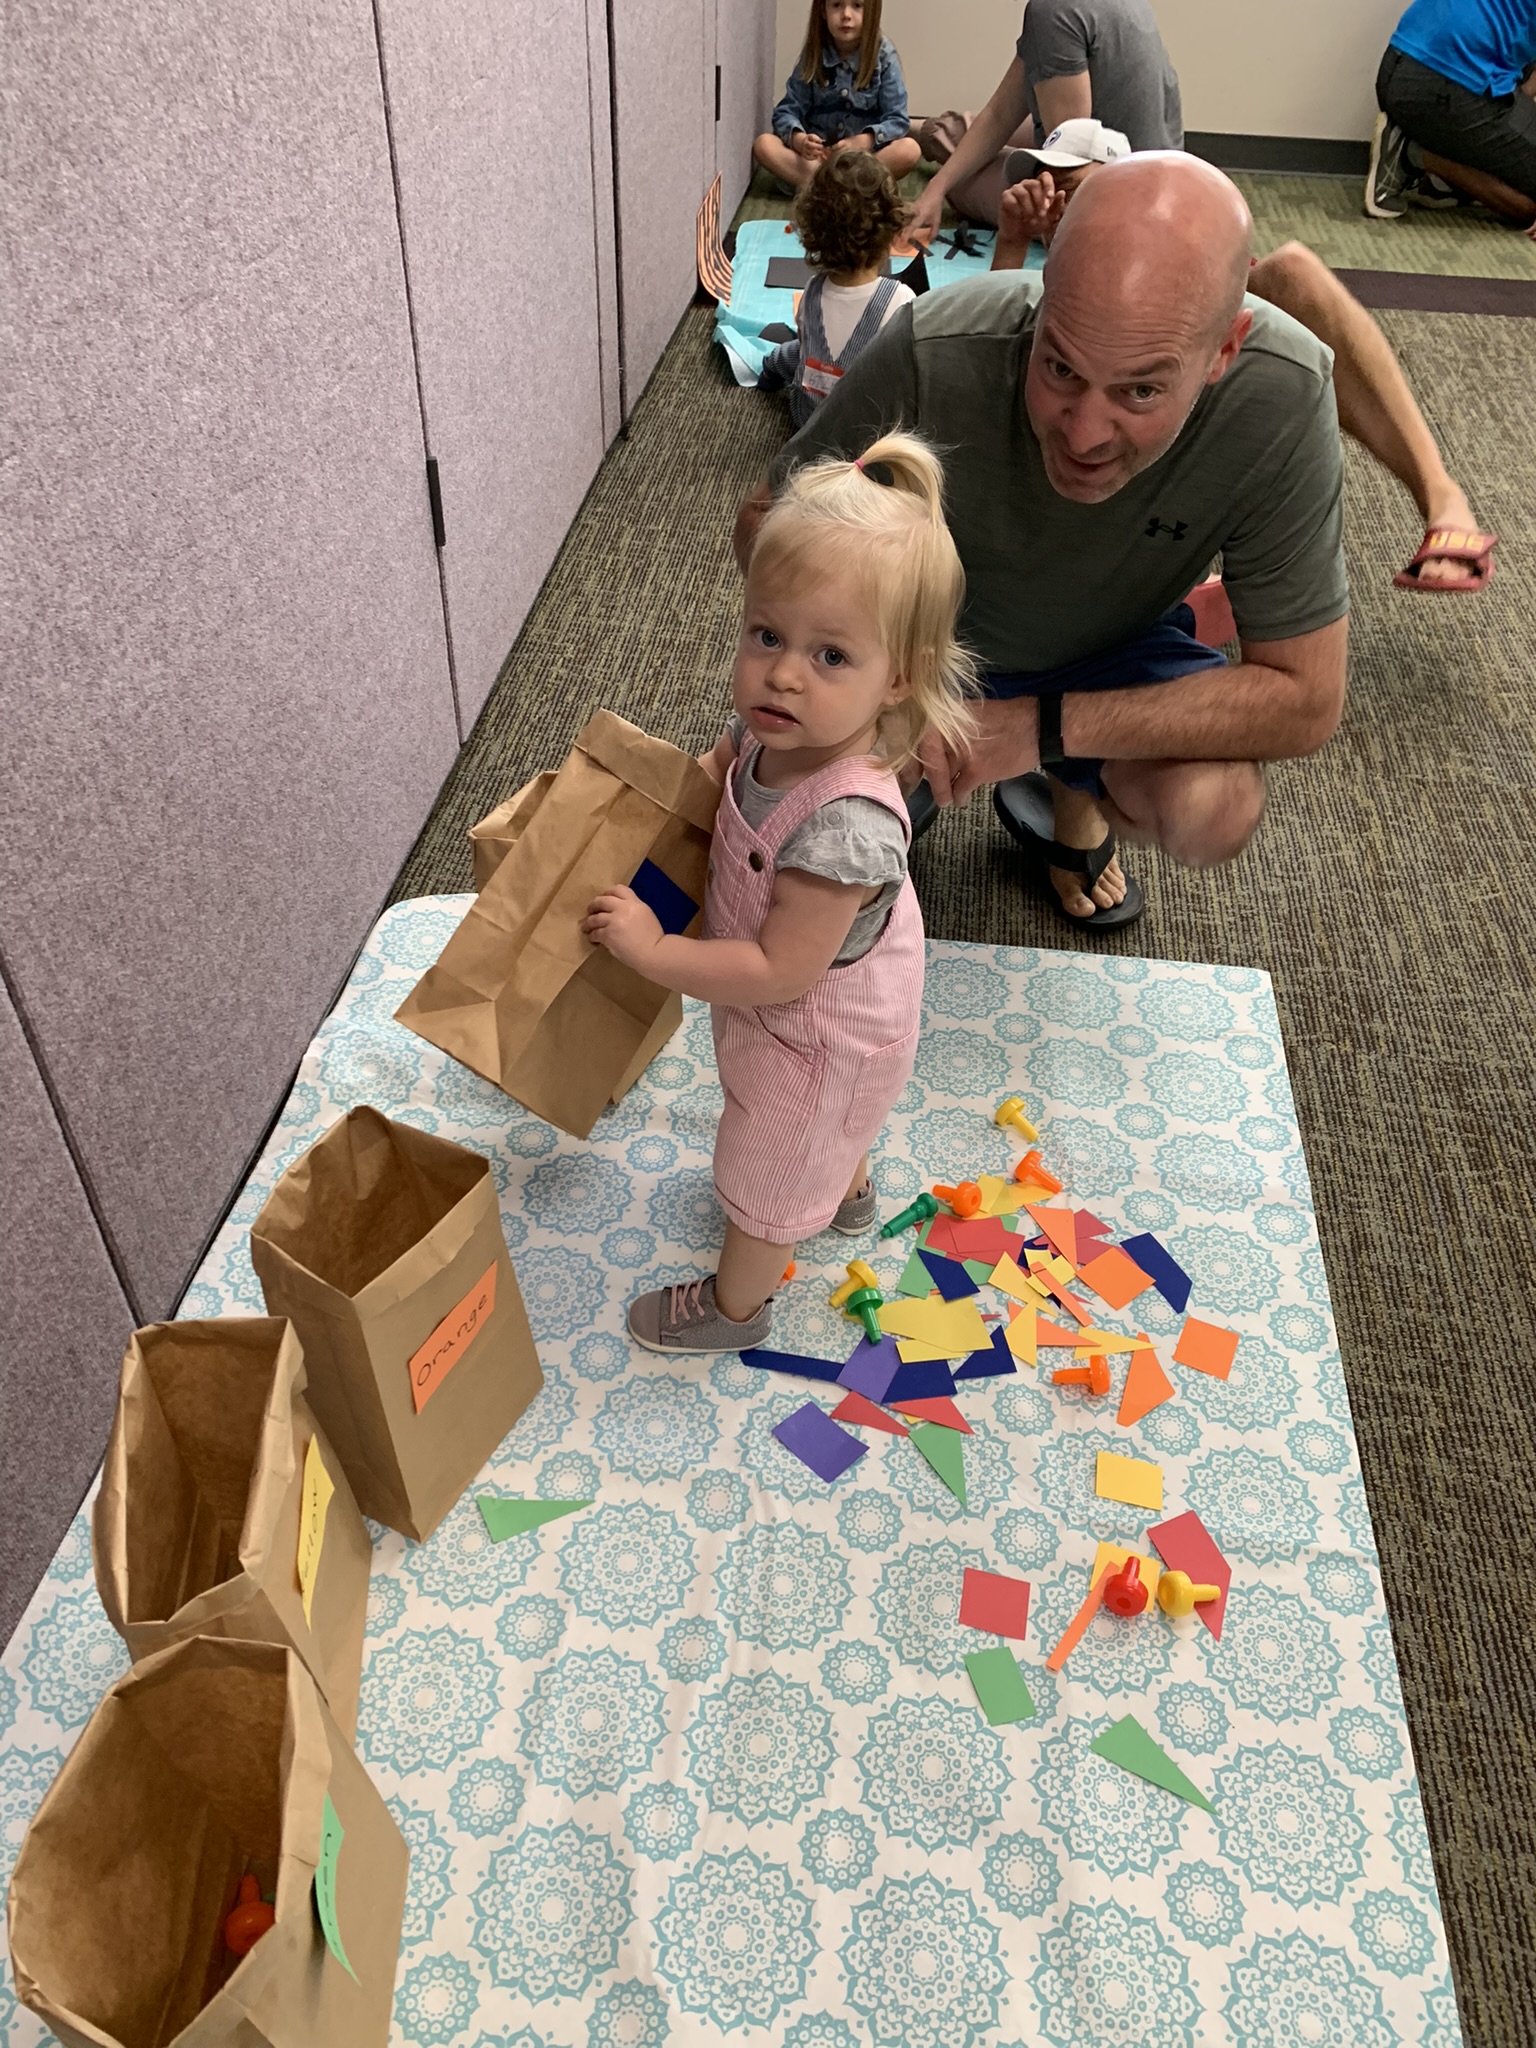 Toddler standing on table cloth sorting colored paper into paper lunch bags